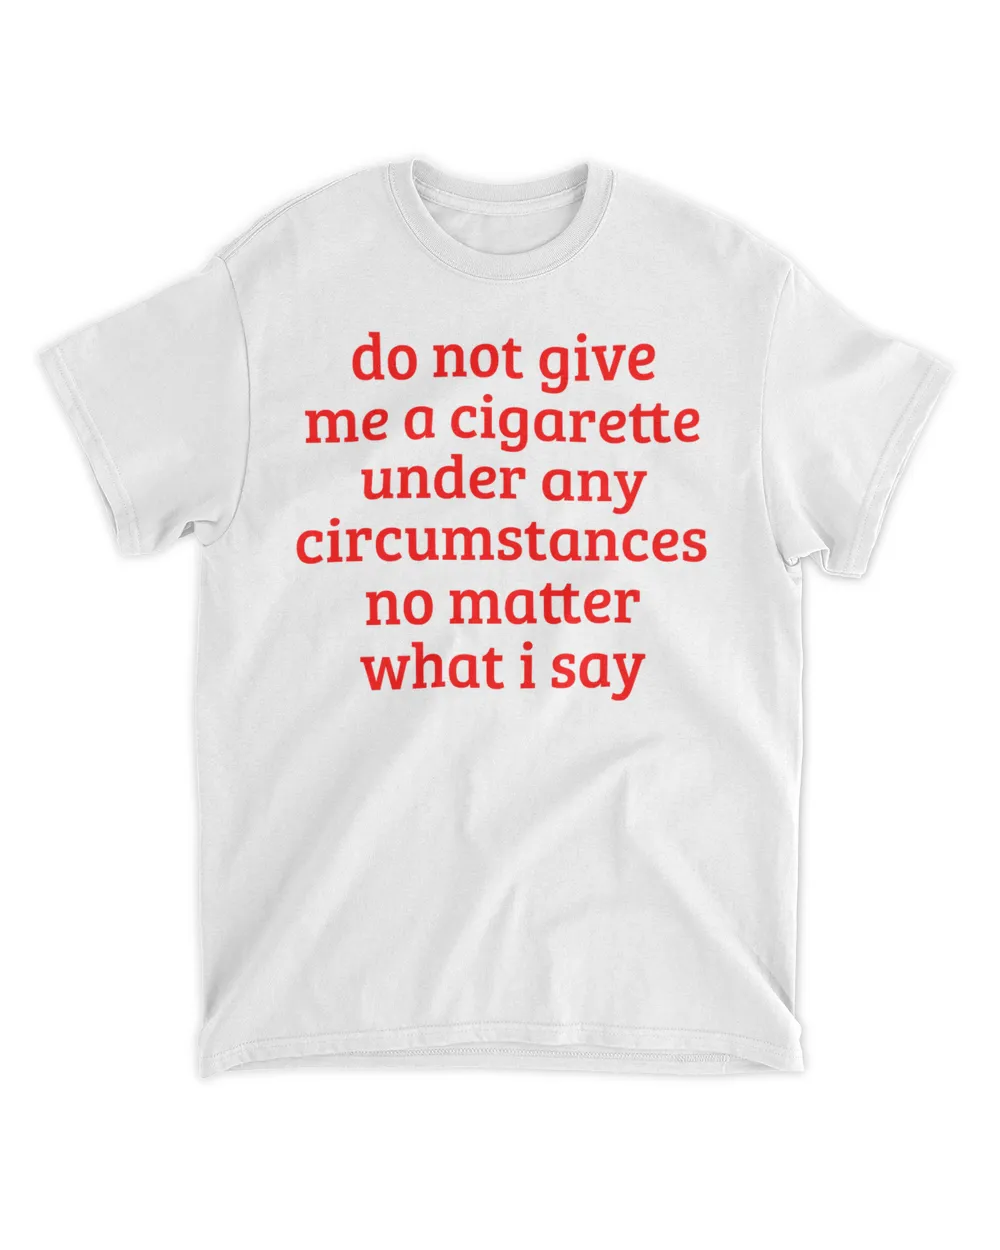  Do not give me a cigarette under any circumstances no matter what i say shirt